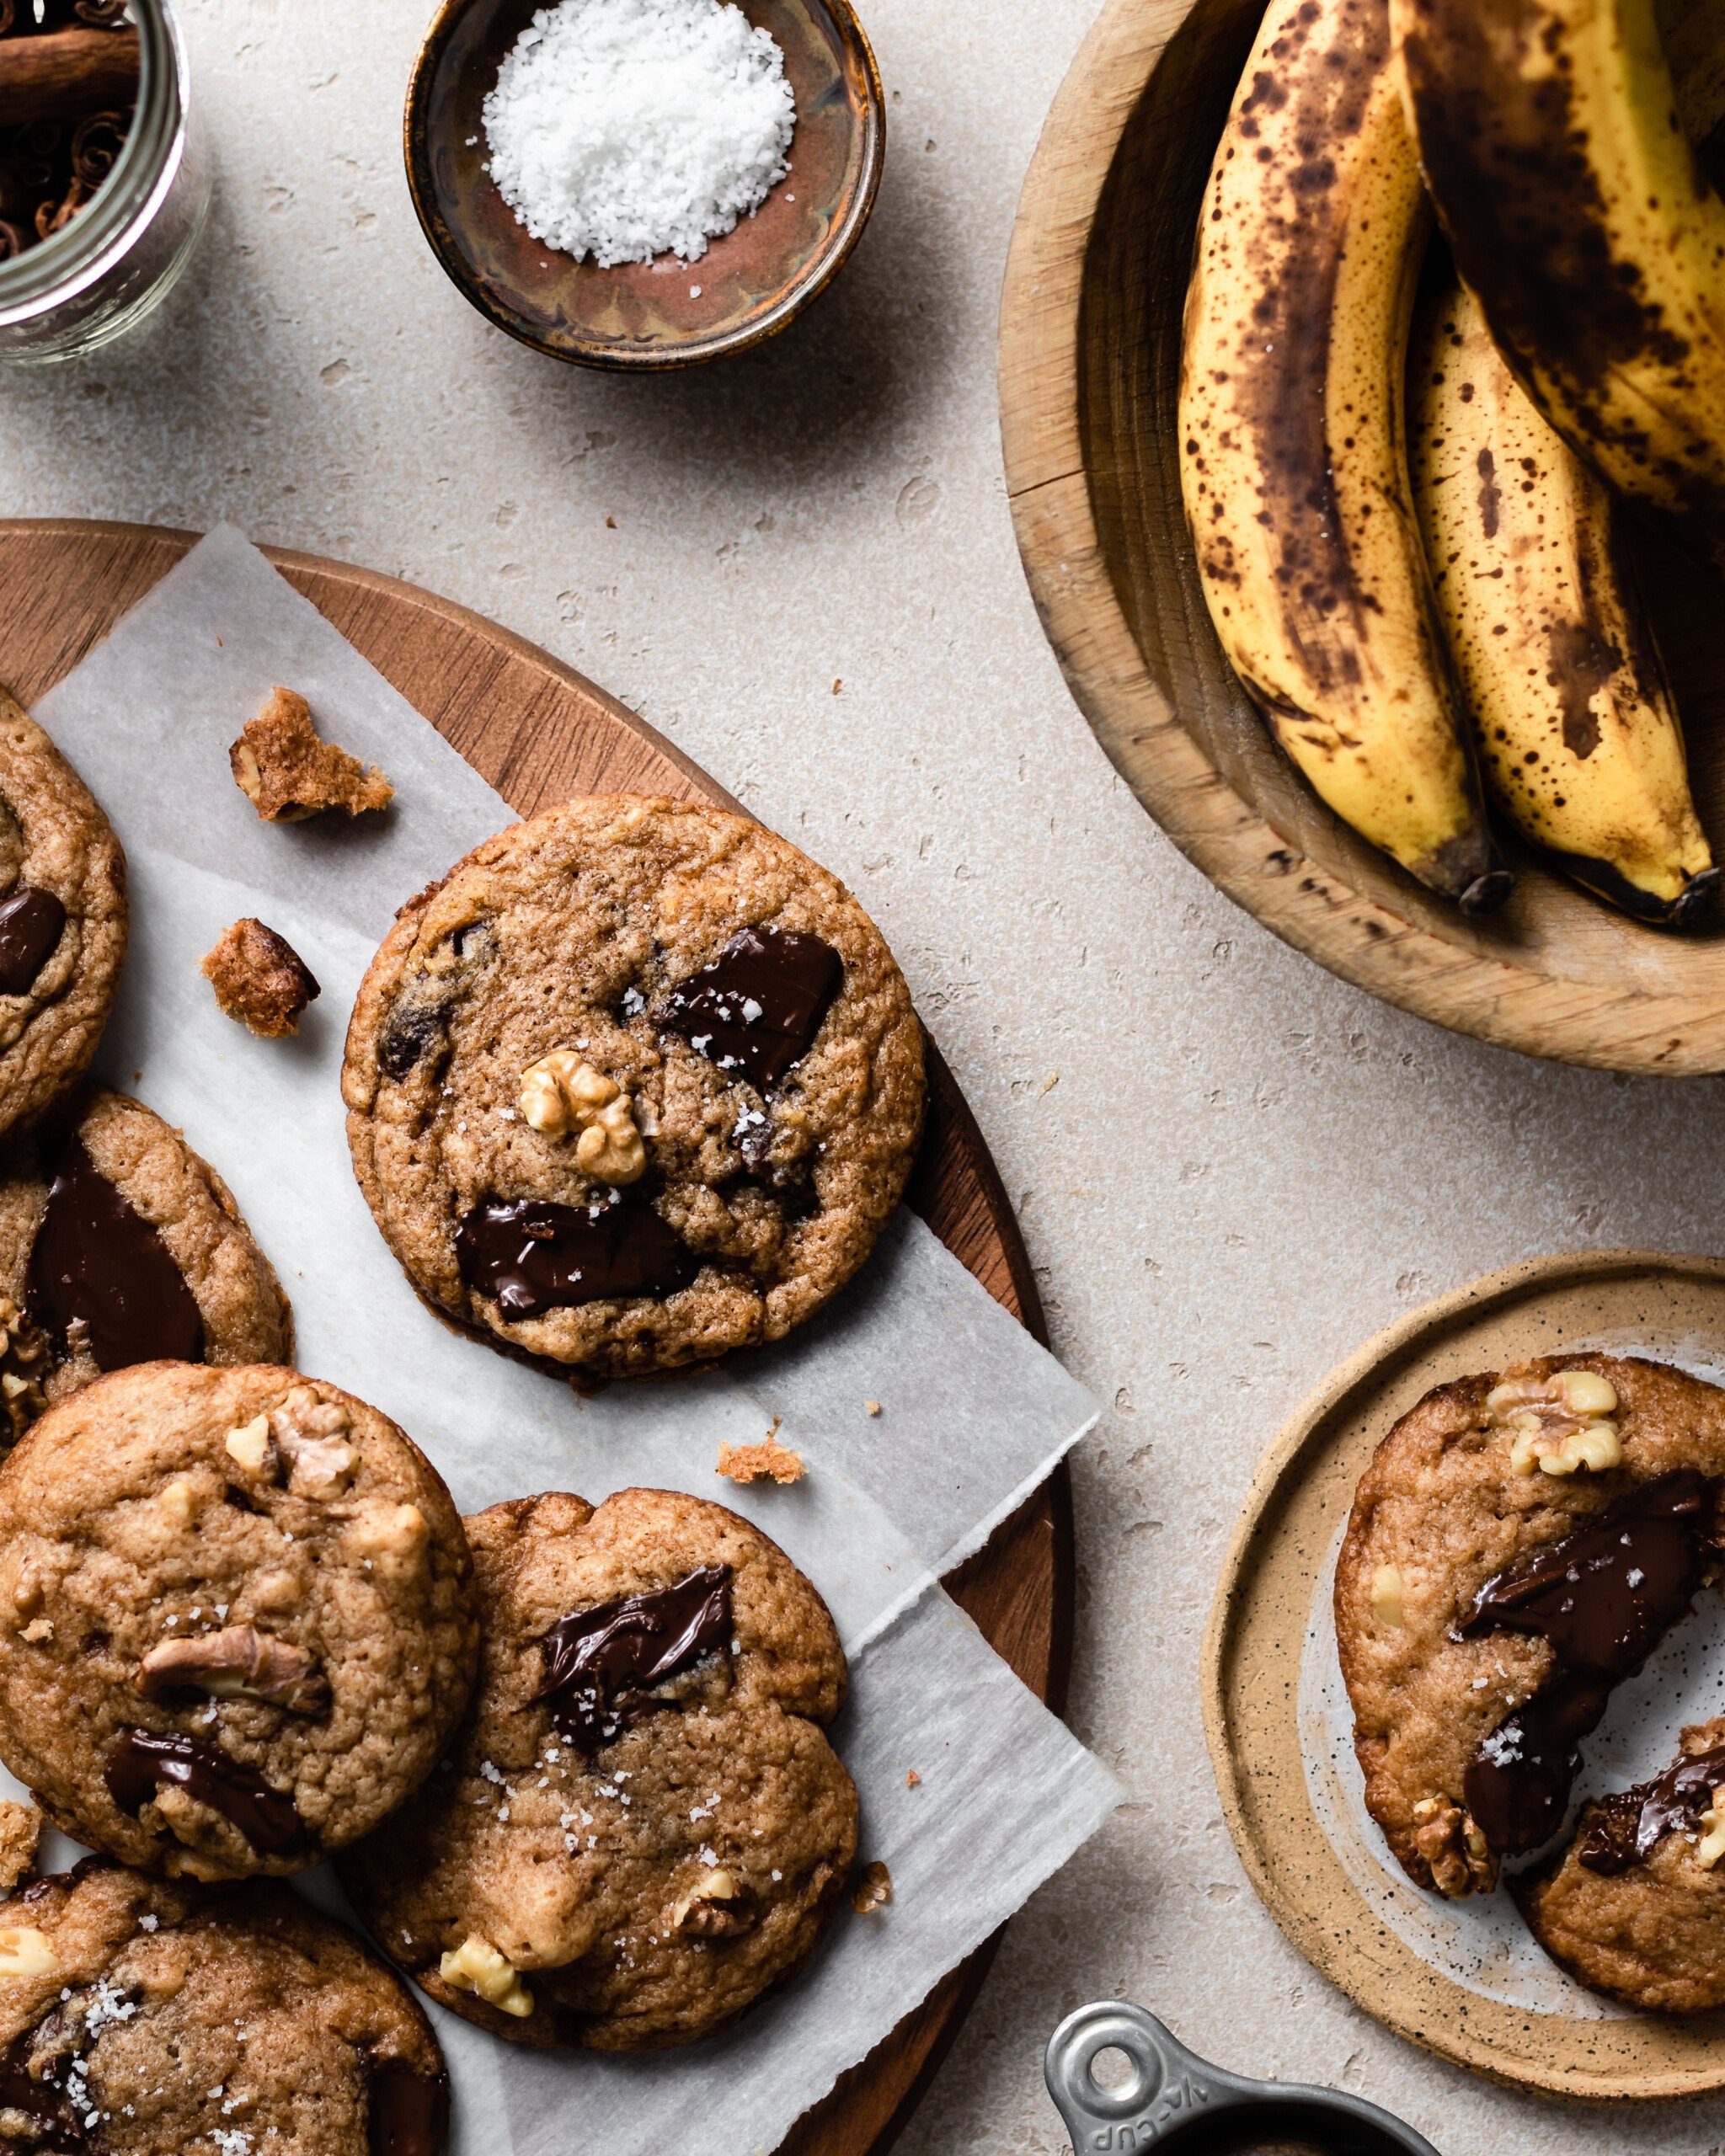 Chocolate cookies with melted chocolate pool and walnuts on a cutting board lined with parchment paper with wood bowl containing bananas and a cookie cut in half. 